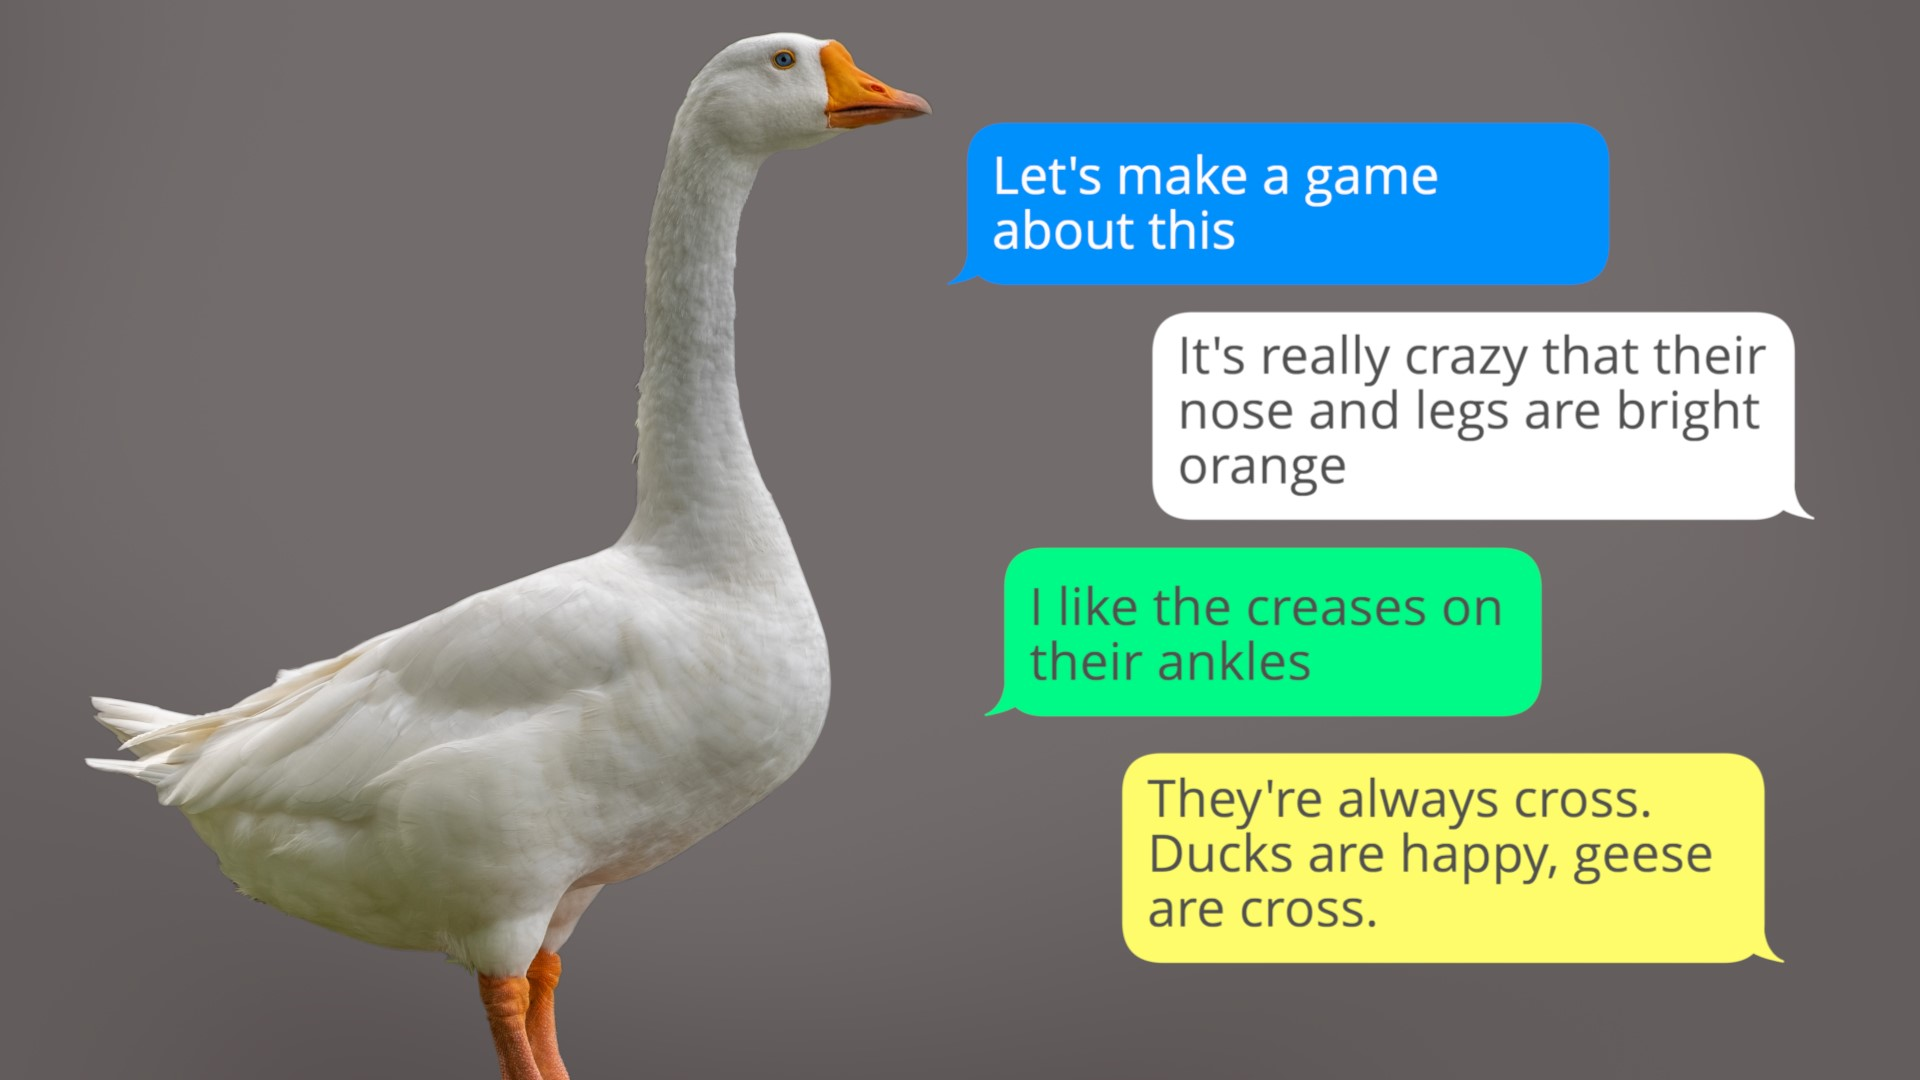 download horrible goose for free